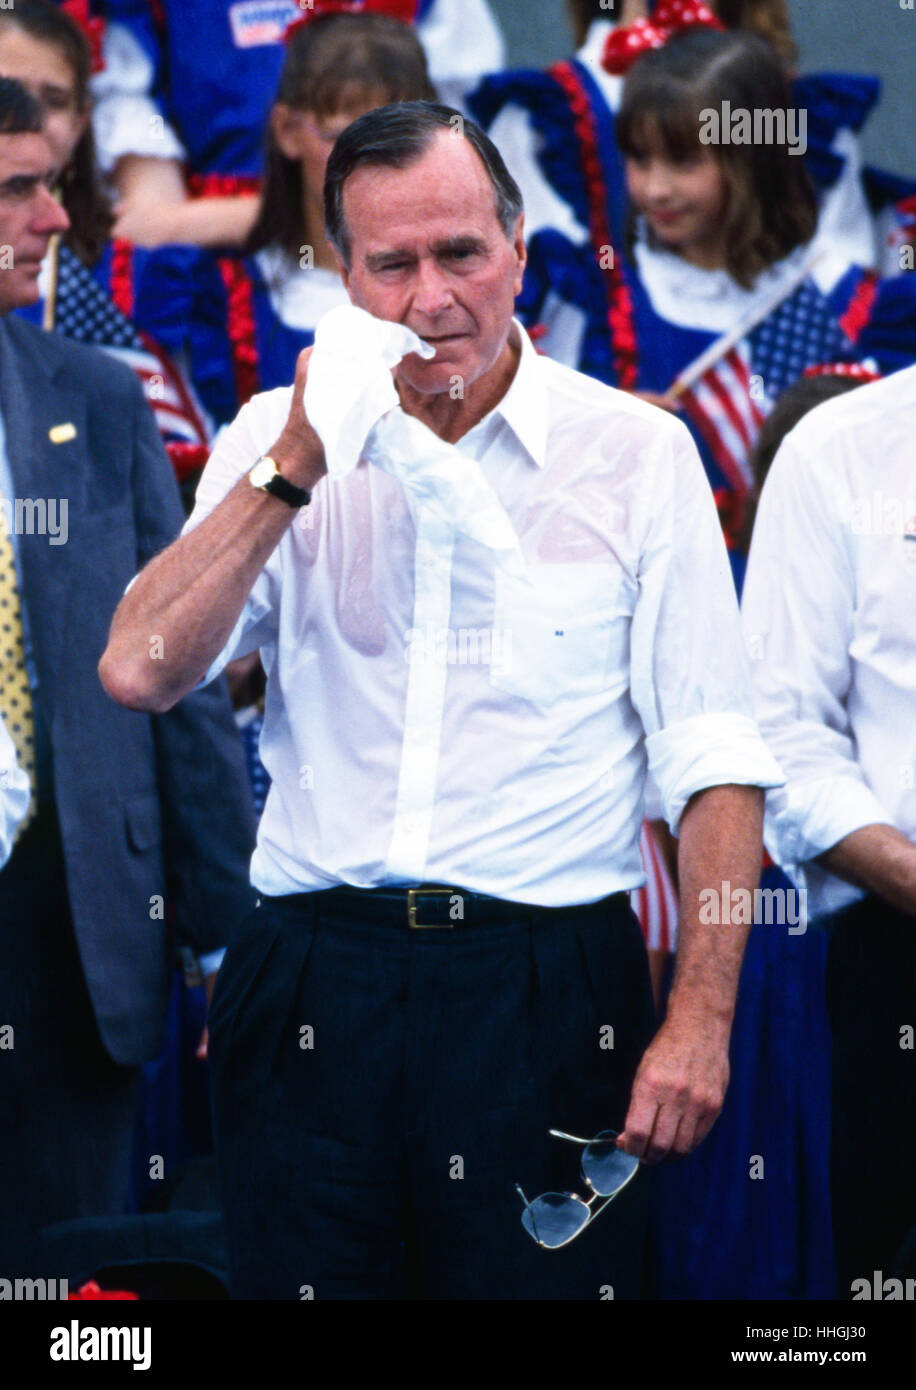 A rain-soaked President George H.W. Bush campaigns for a second four year term as President of the United States in Woodstock, Georgia.  Bush was unsuccessful in his bid, losing to Bill Clinton. Stock Photo